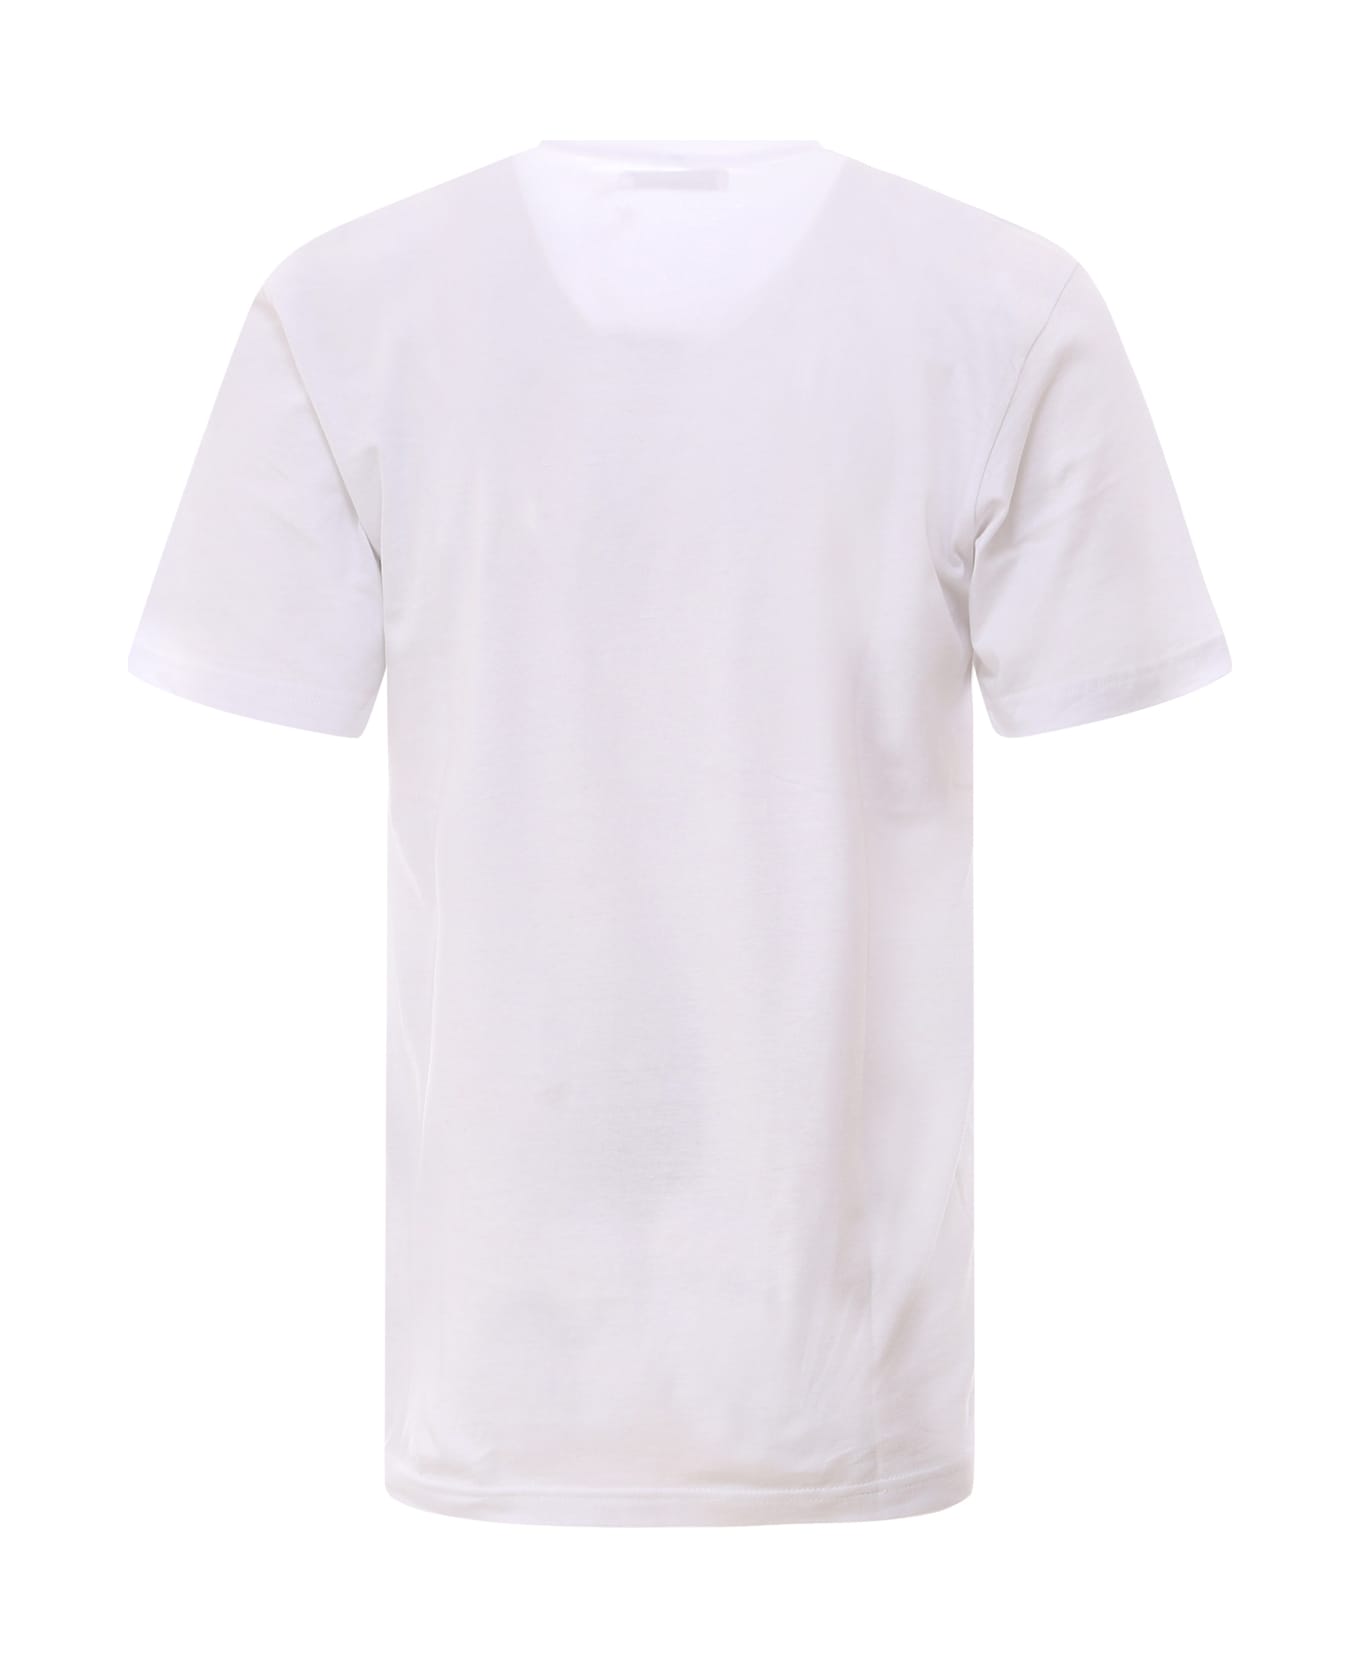 Silted T-shirt - White シャツ